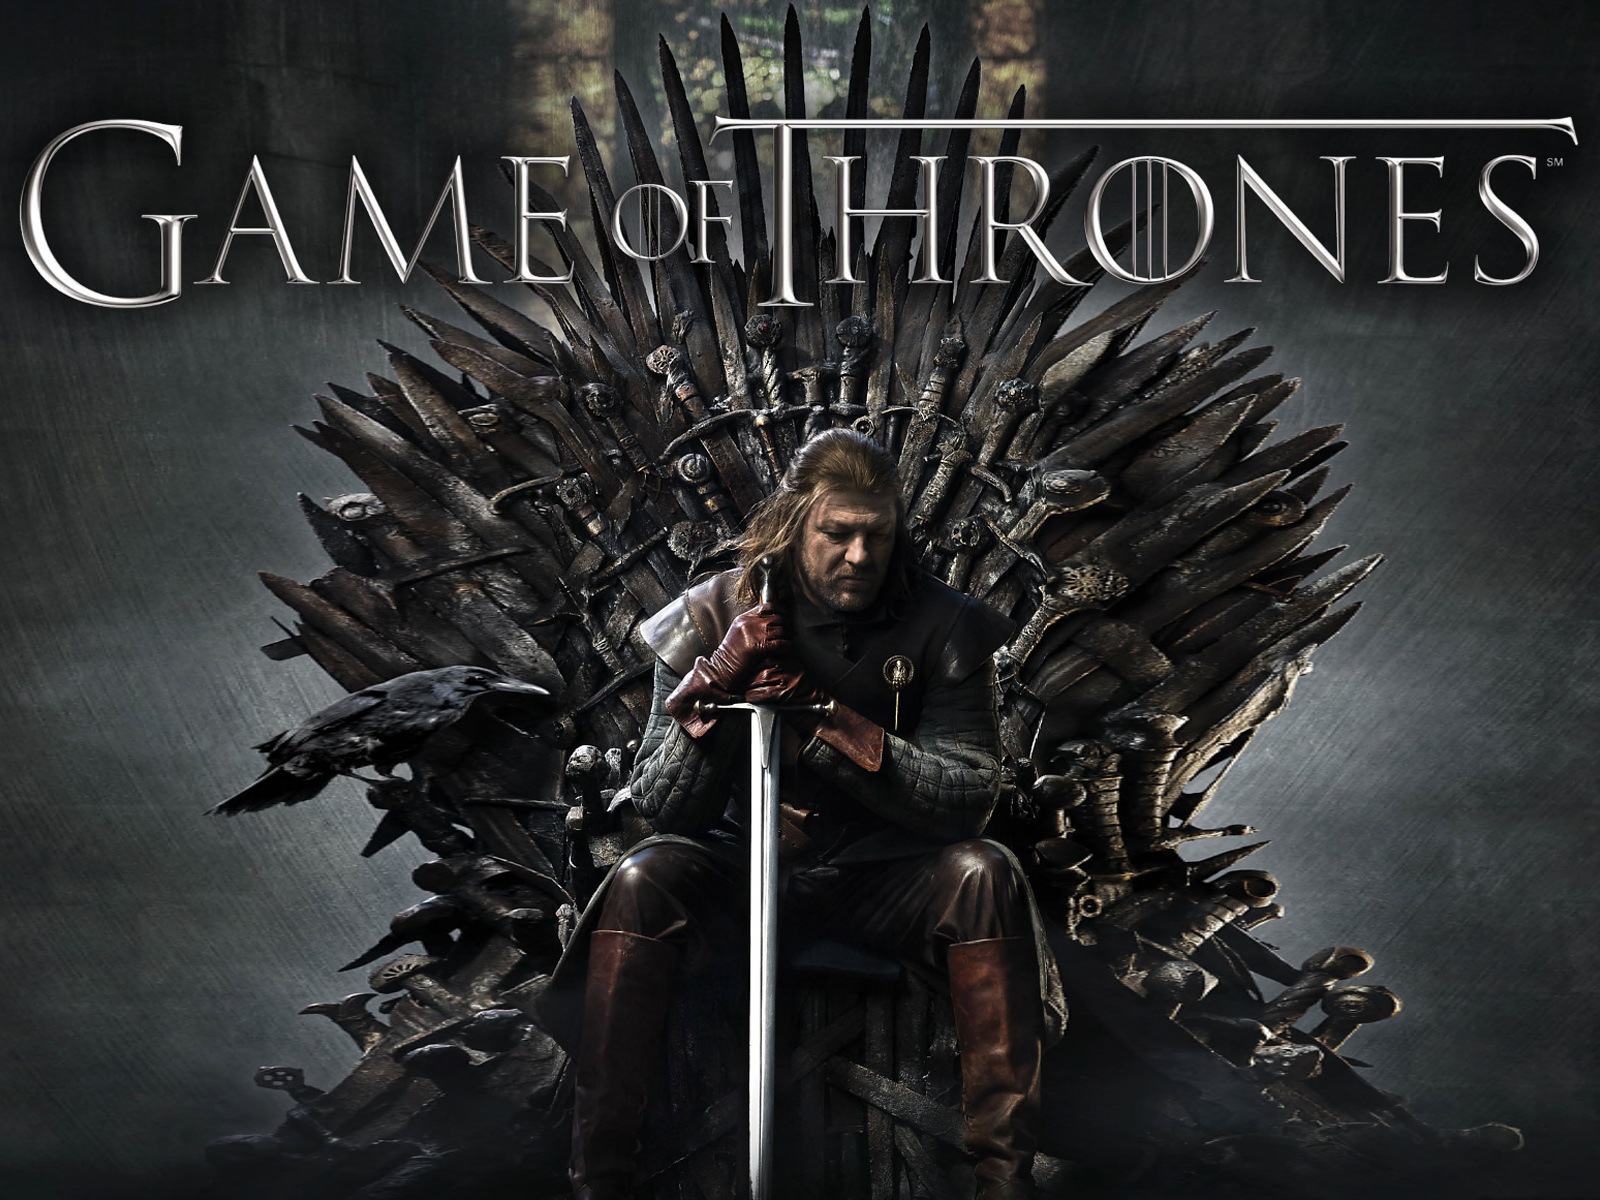 A Song of Ice and Fire: Game of Thrones 冰與火之歌：權力的遊戲高清壁紙 #6 - 1600x1200